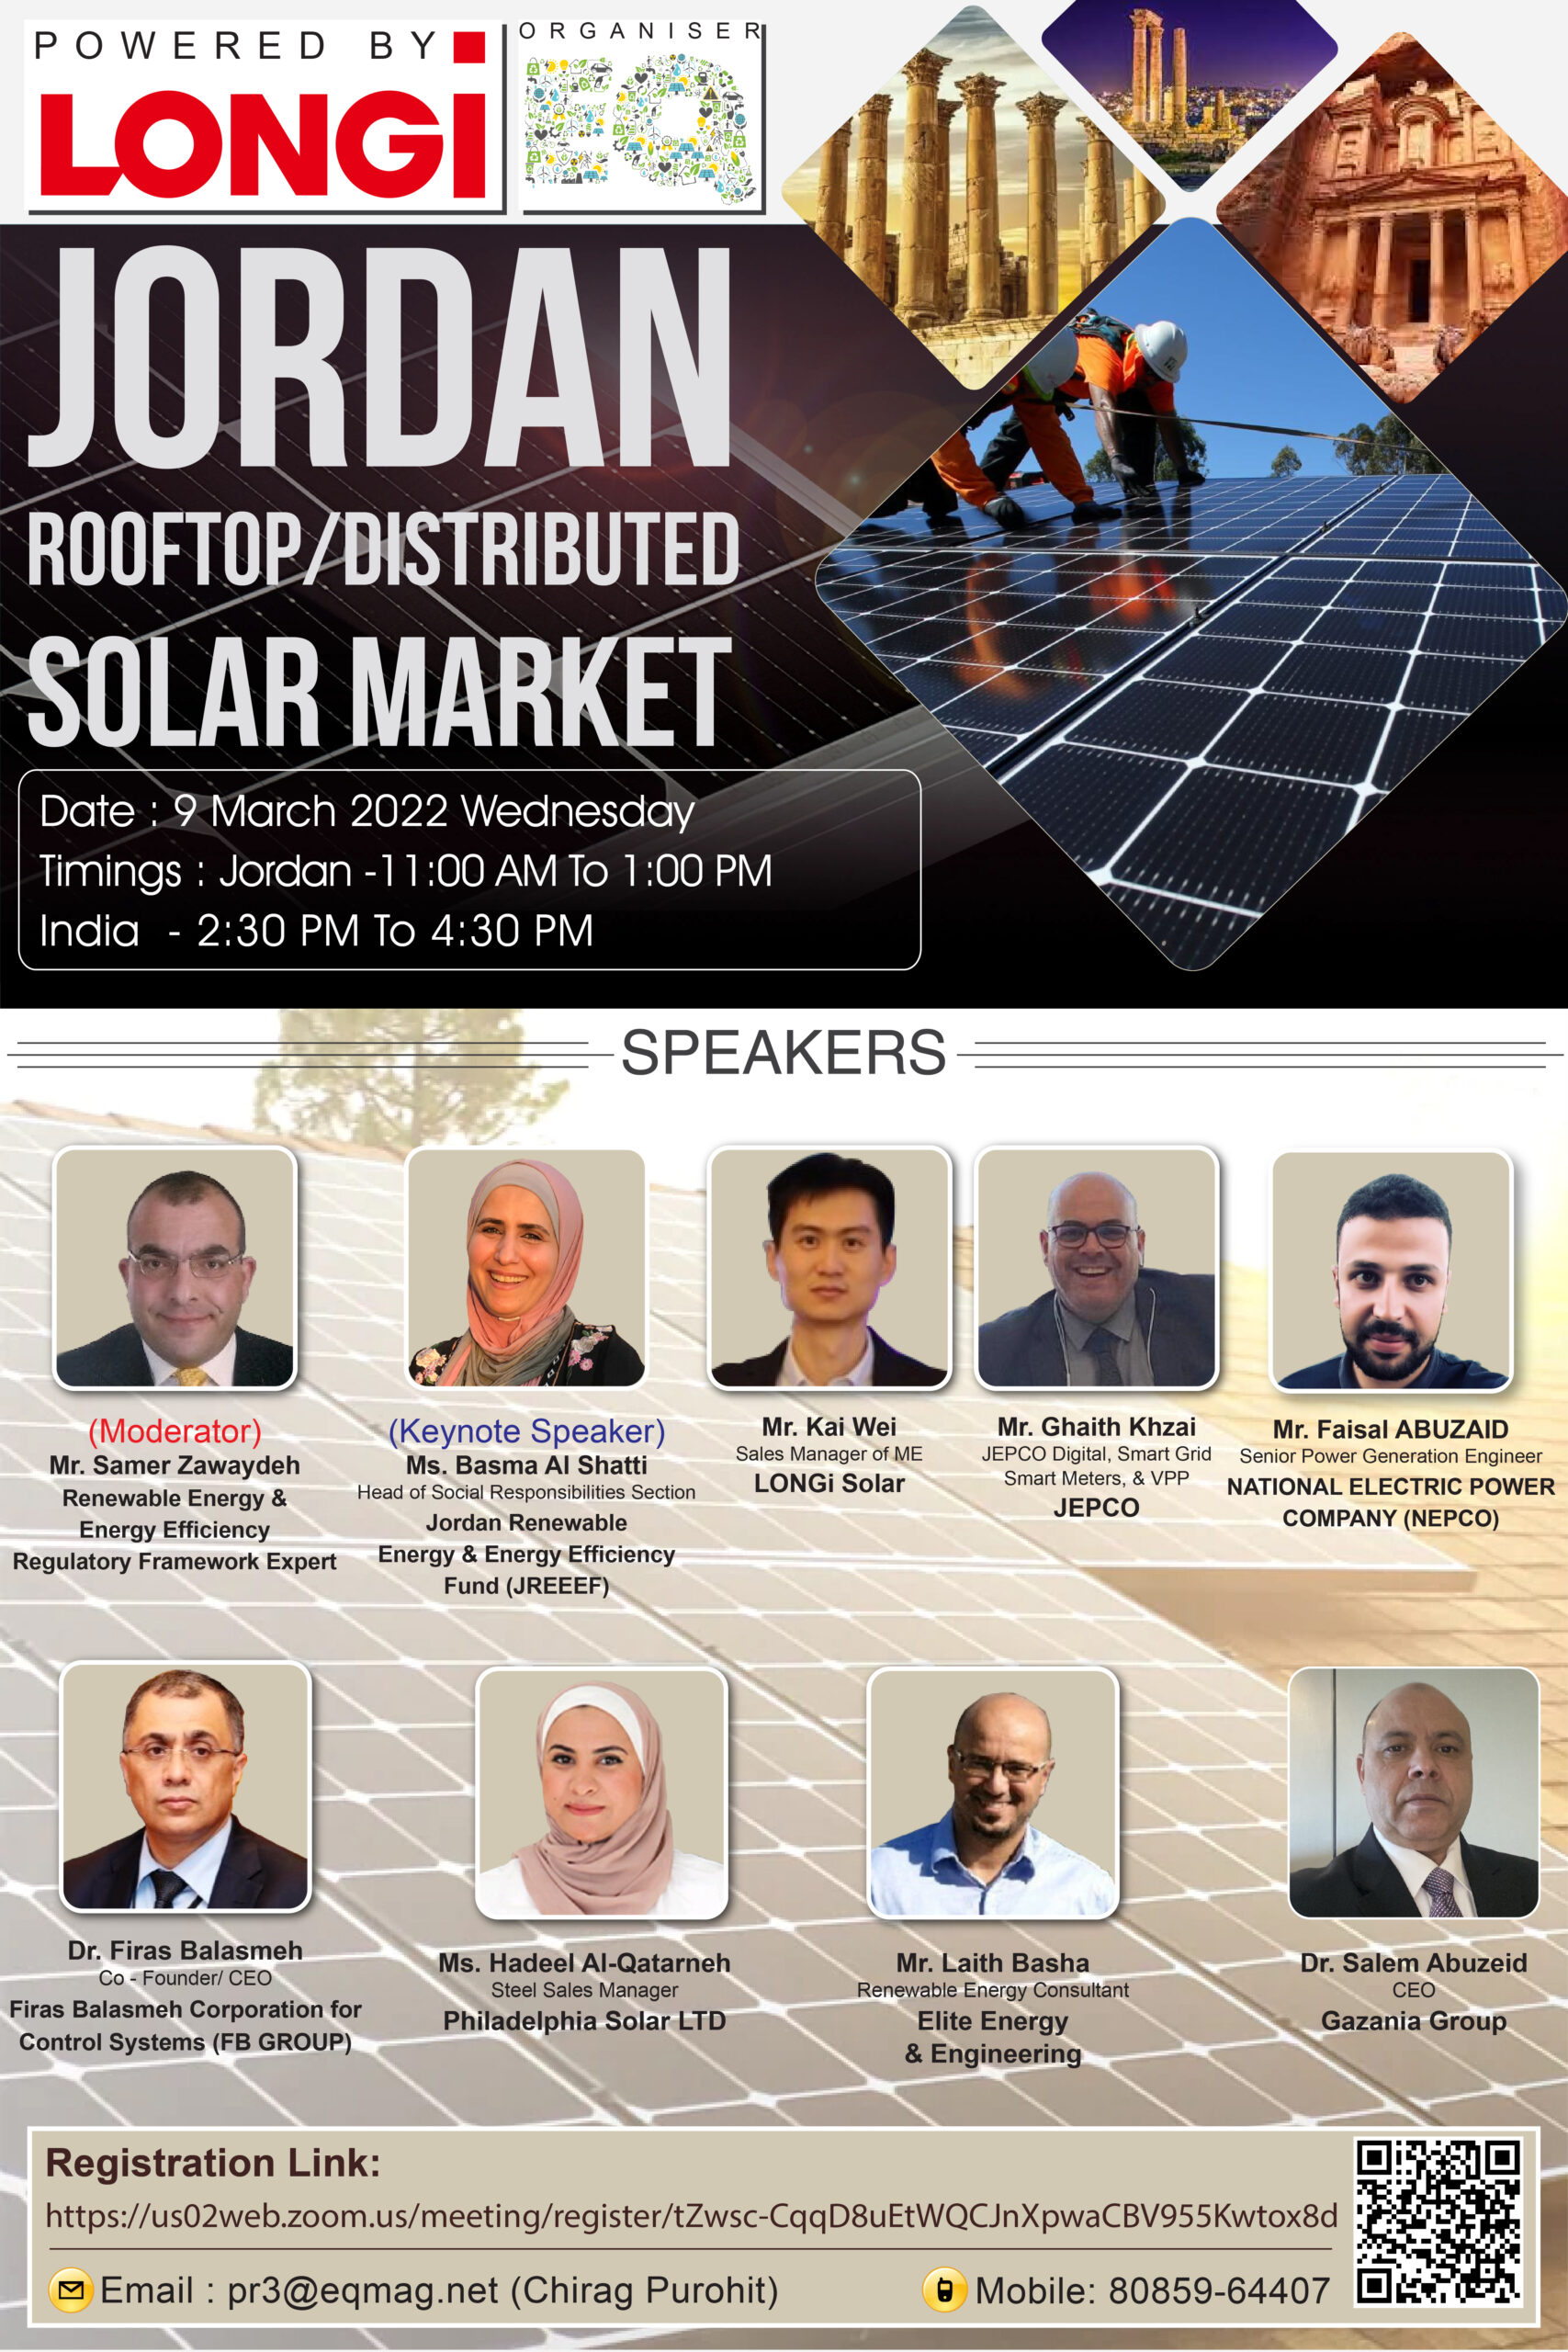 EQ Webinar on Jordan RoofTop / Distributed Solar Market Outlook Powered by LONGi 9th March 2022 (Wednesday) From 2:30 PM Onwards….Register Now!